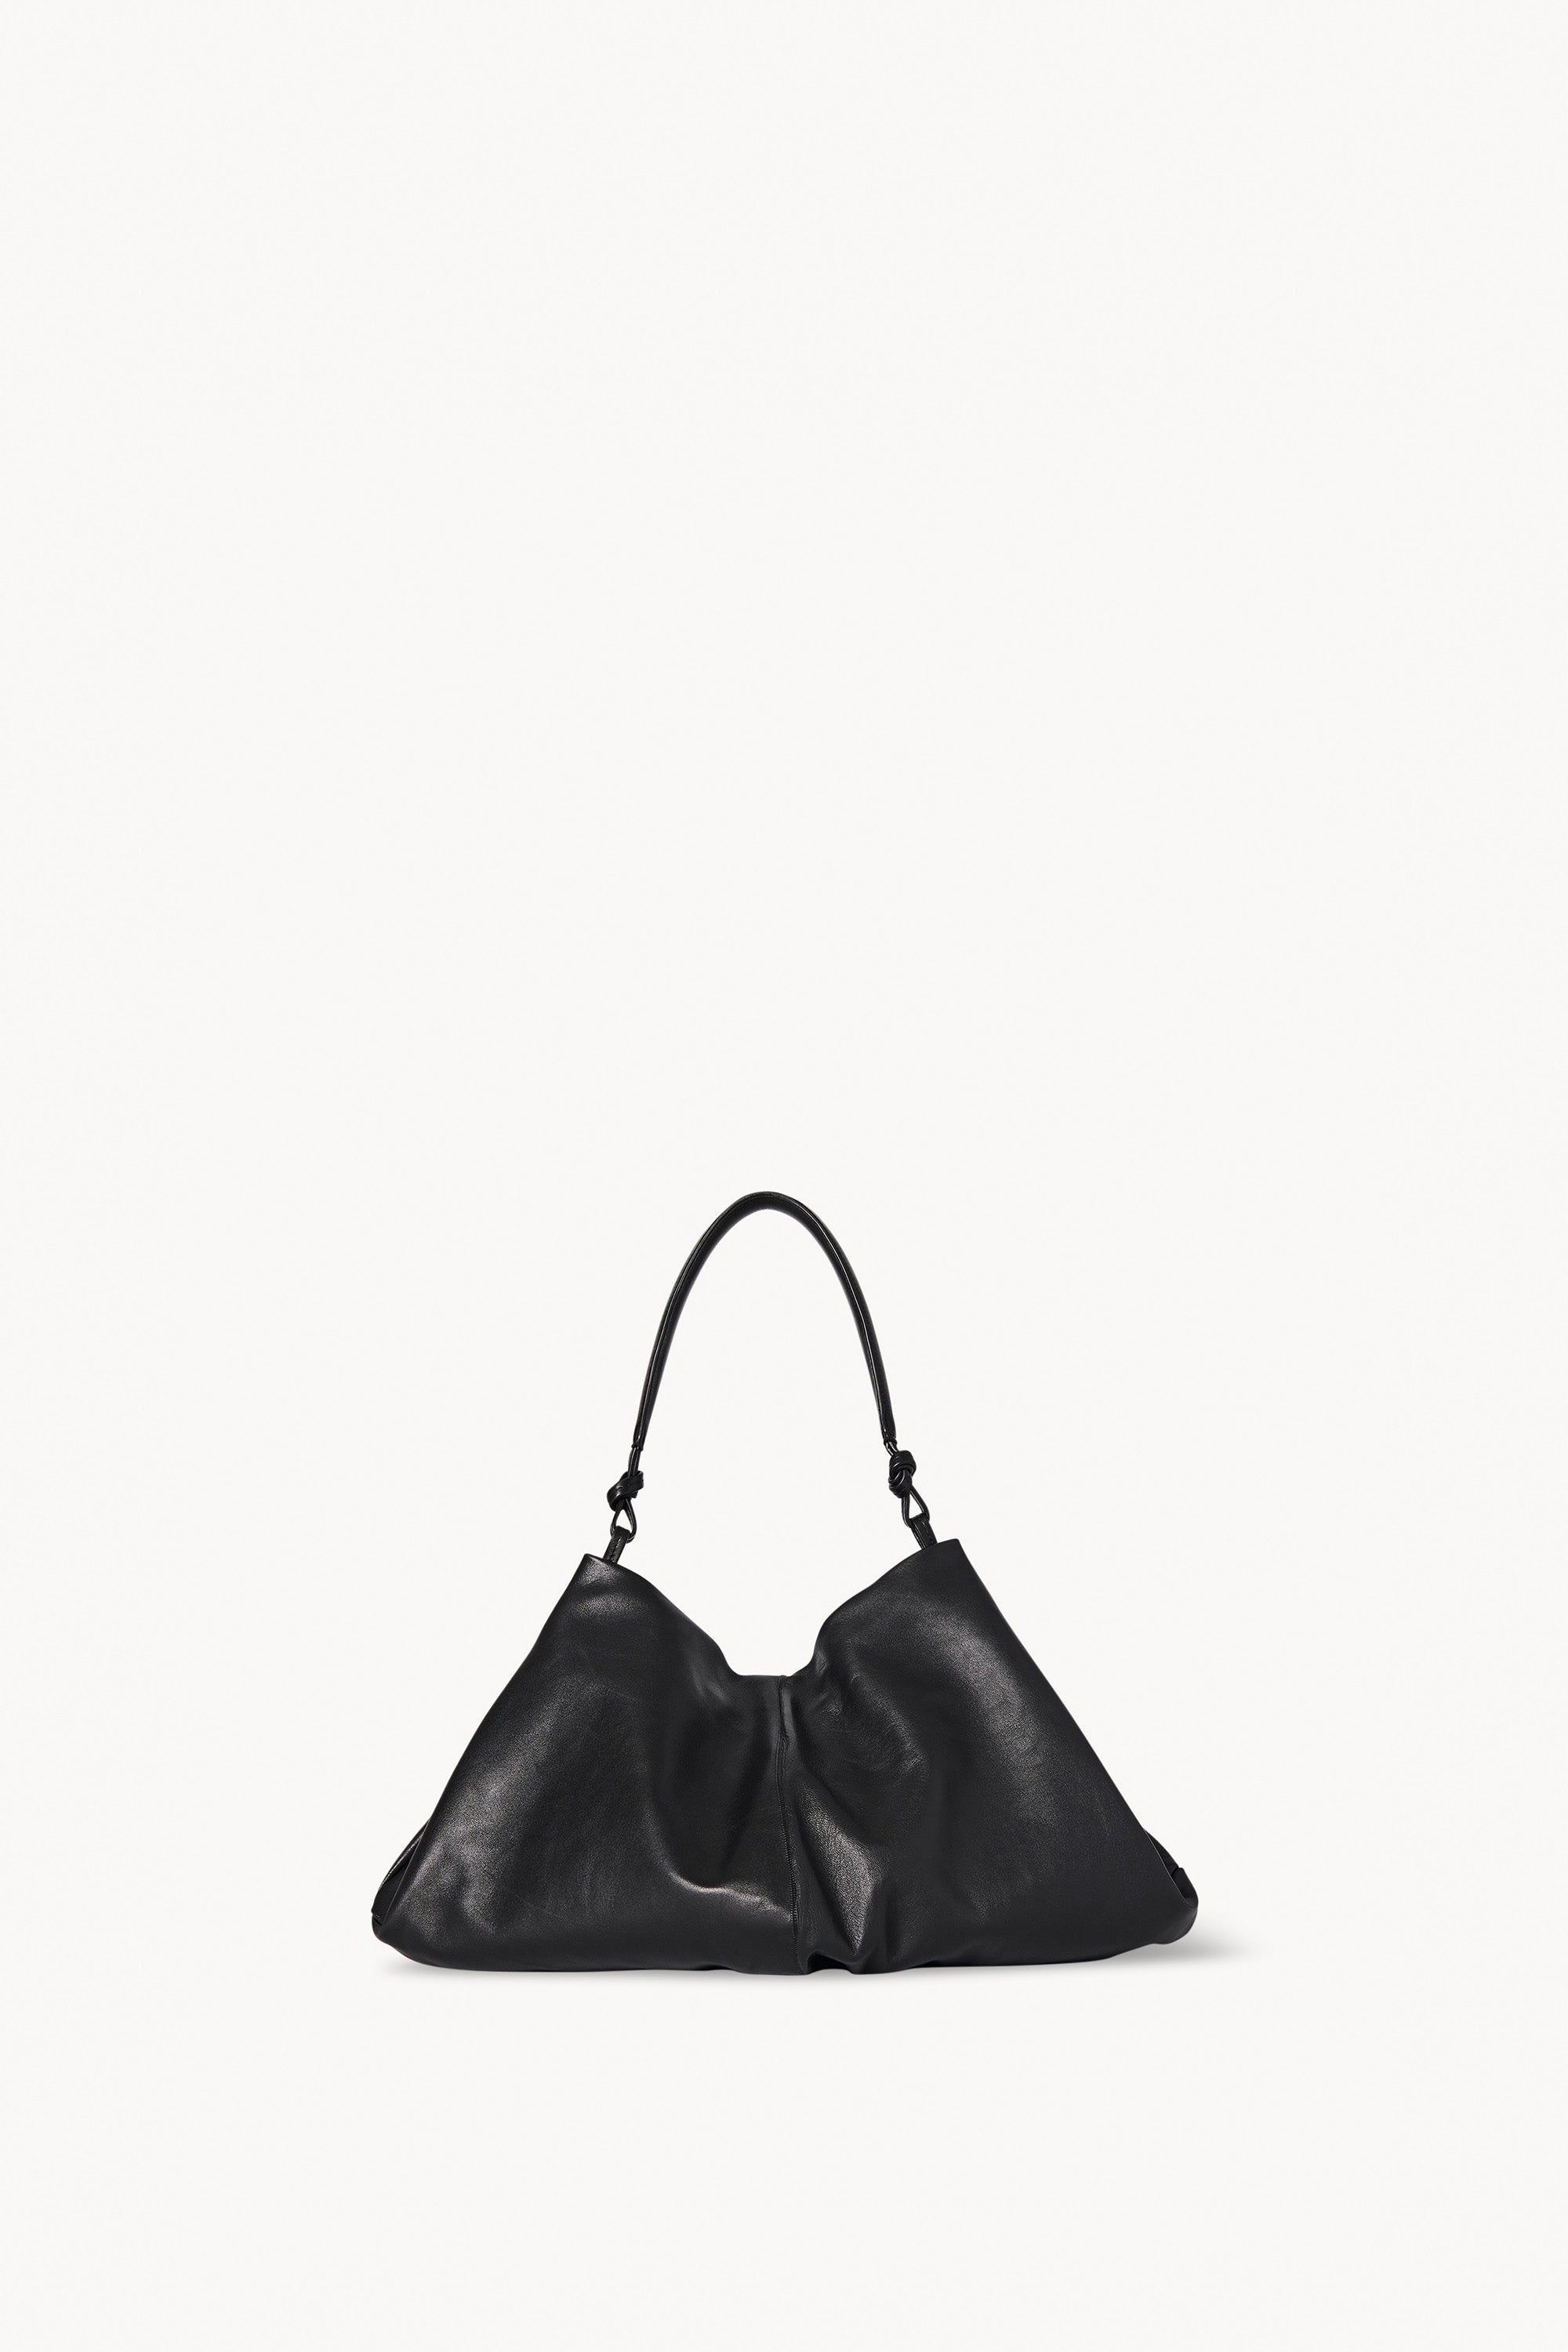 The Row Samia Bag in Leather | REVERSIBLE